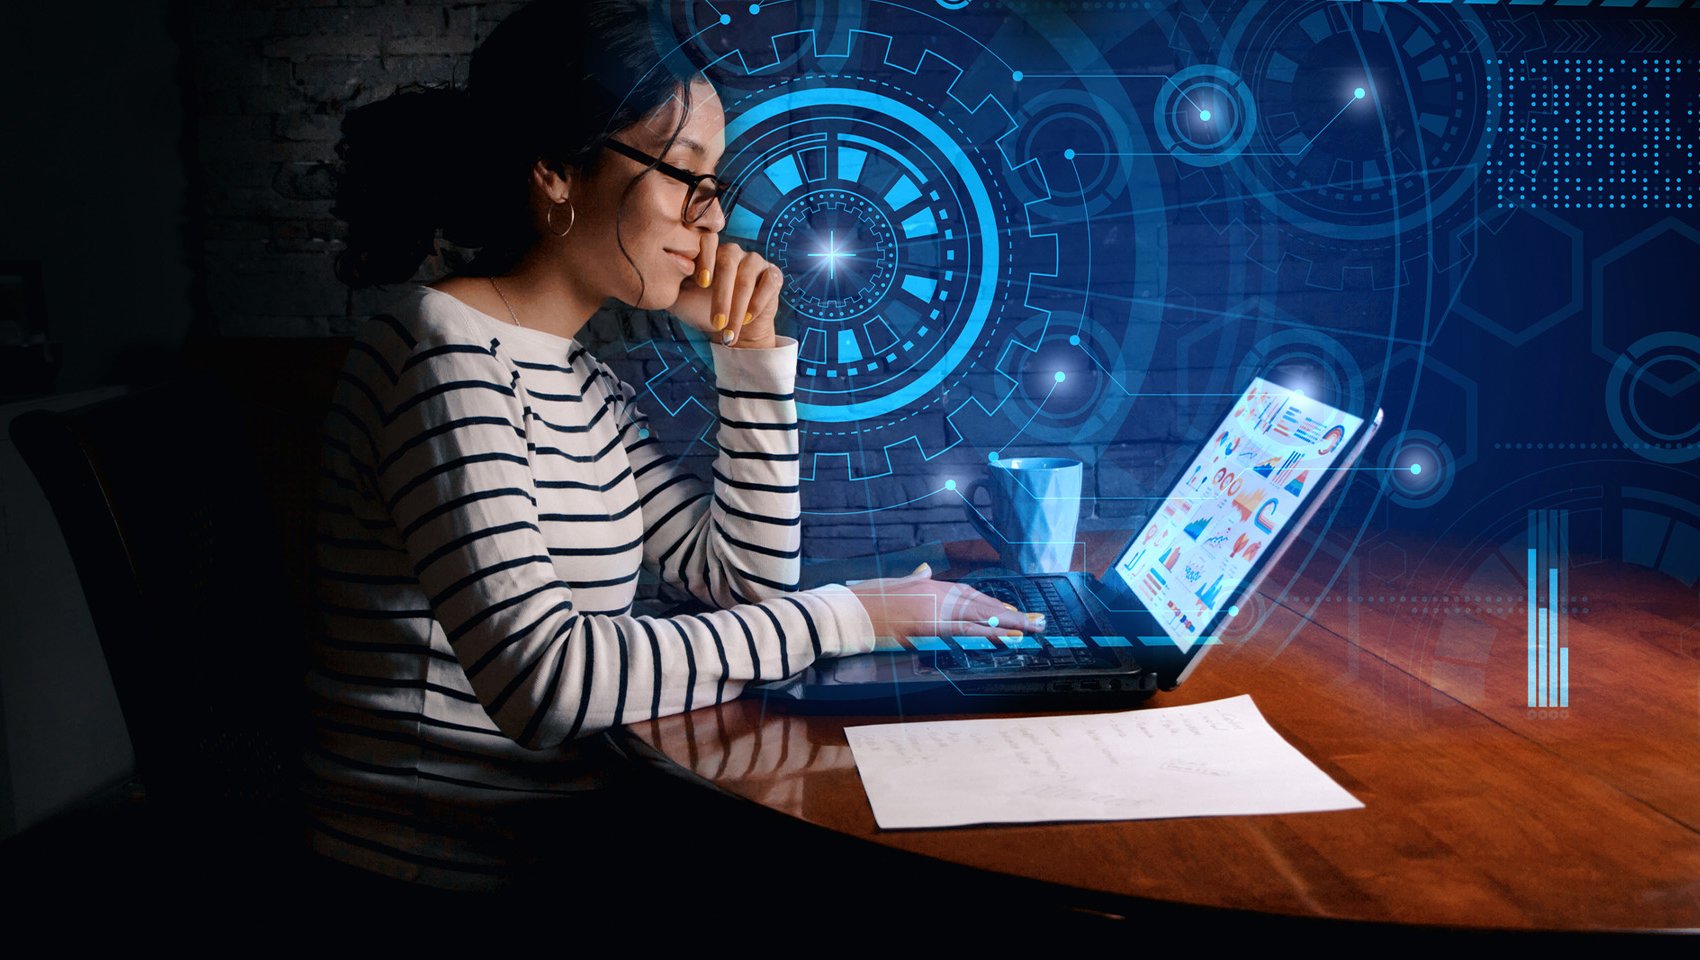 woman sitting at desk working on laptop with digital graphics surrounding her